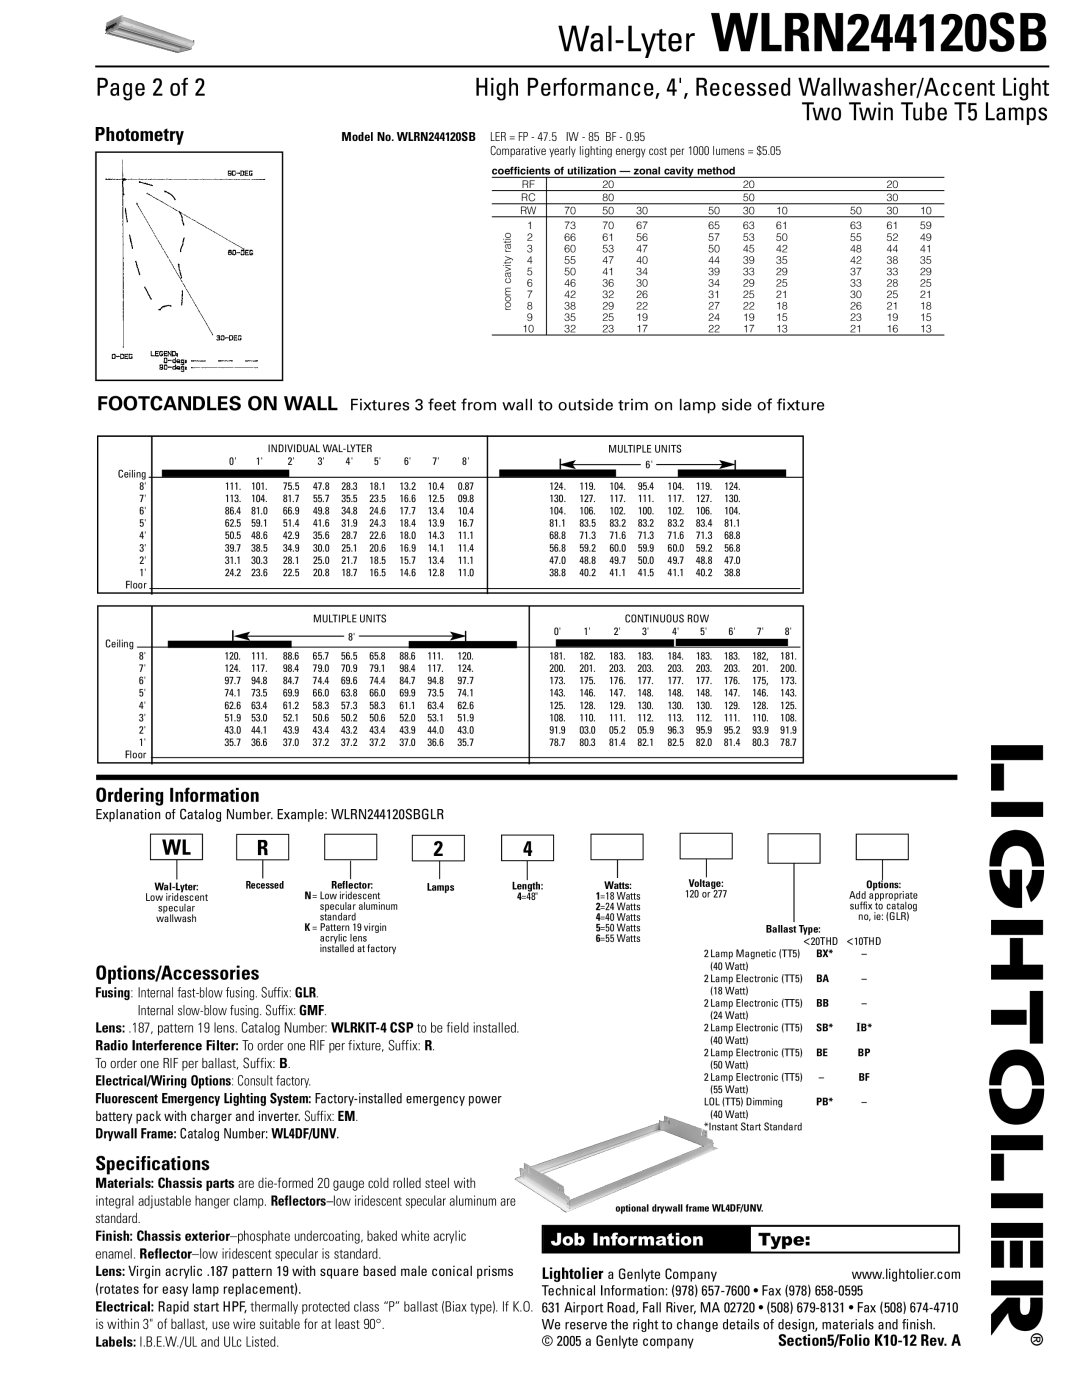 Lightolier WLRN244120SB Page 2 of, Two Twin Tube T5 Lamps, Photometry, Ordering Information, Options/Accessories, Type 